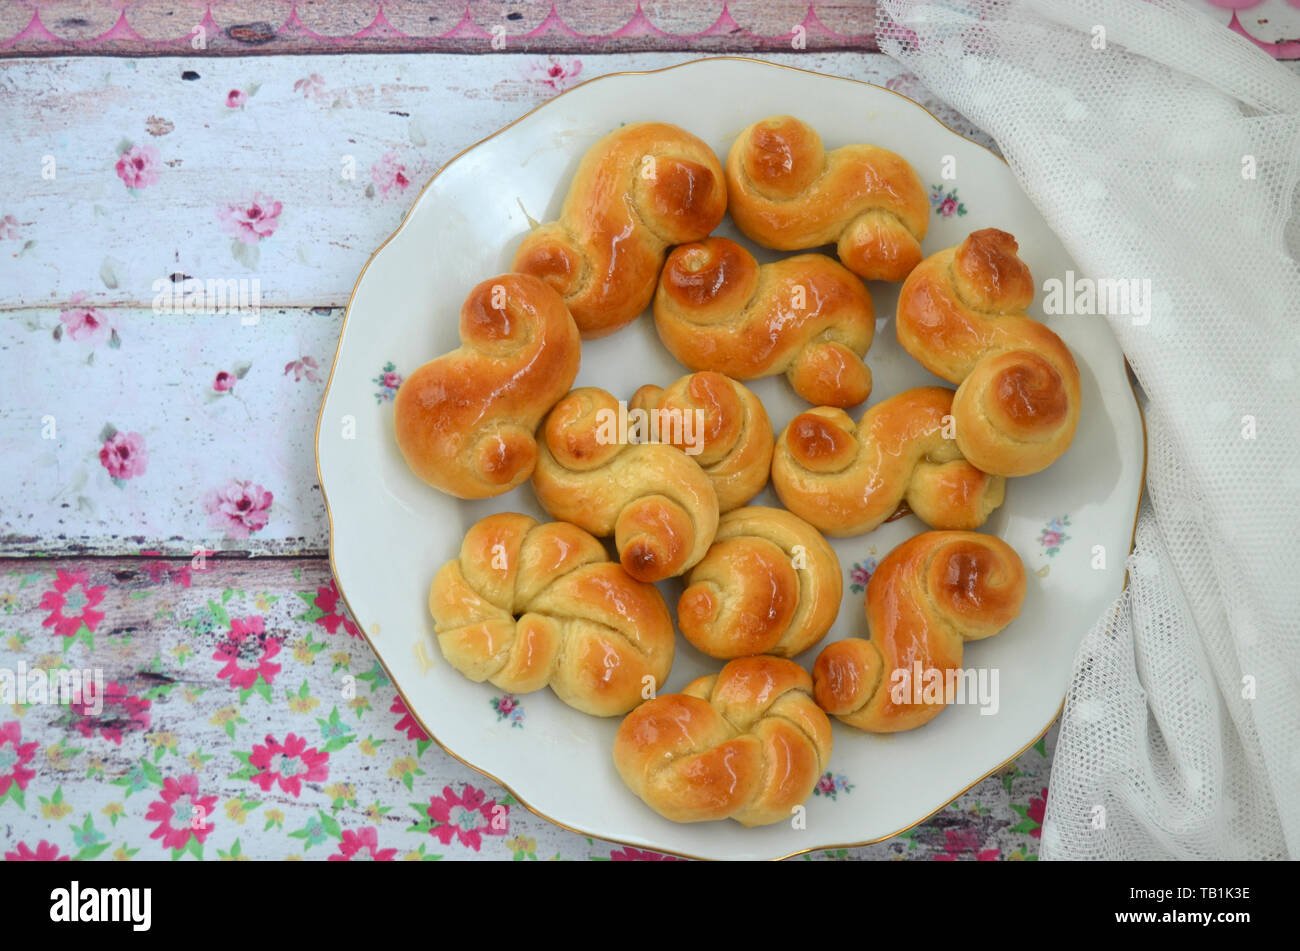 Home made traditional czech easter sweet yeast dough pastry with honey glaze: Jidase or Jidasky (Judas Knots).  They are traditionally baked and eaten Stock Photo